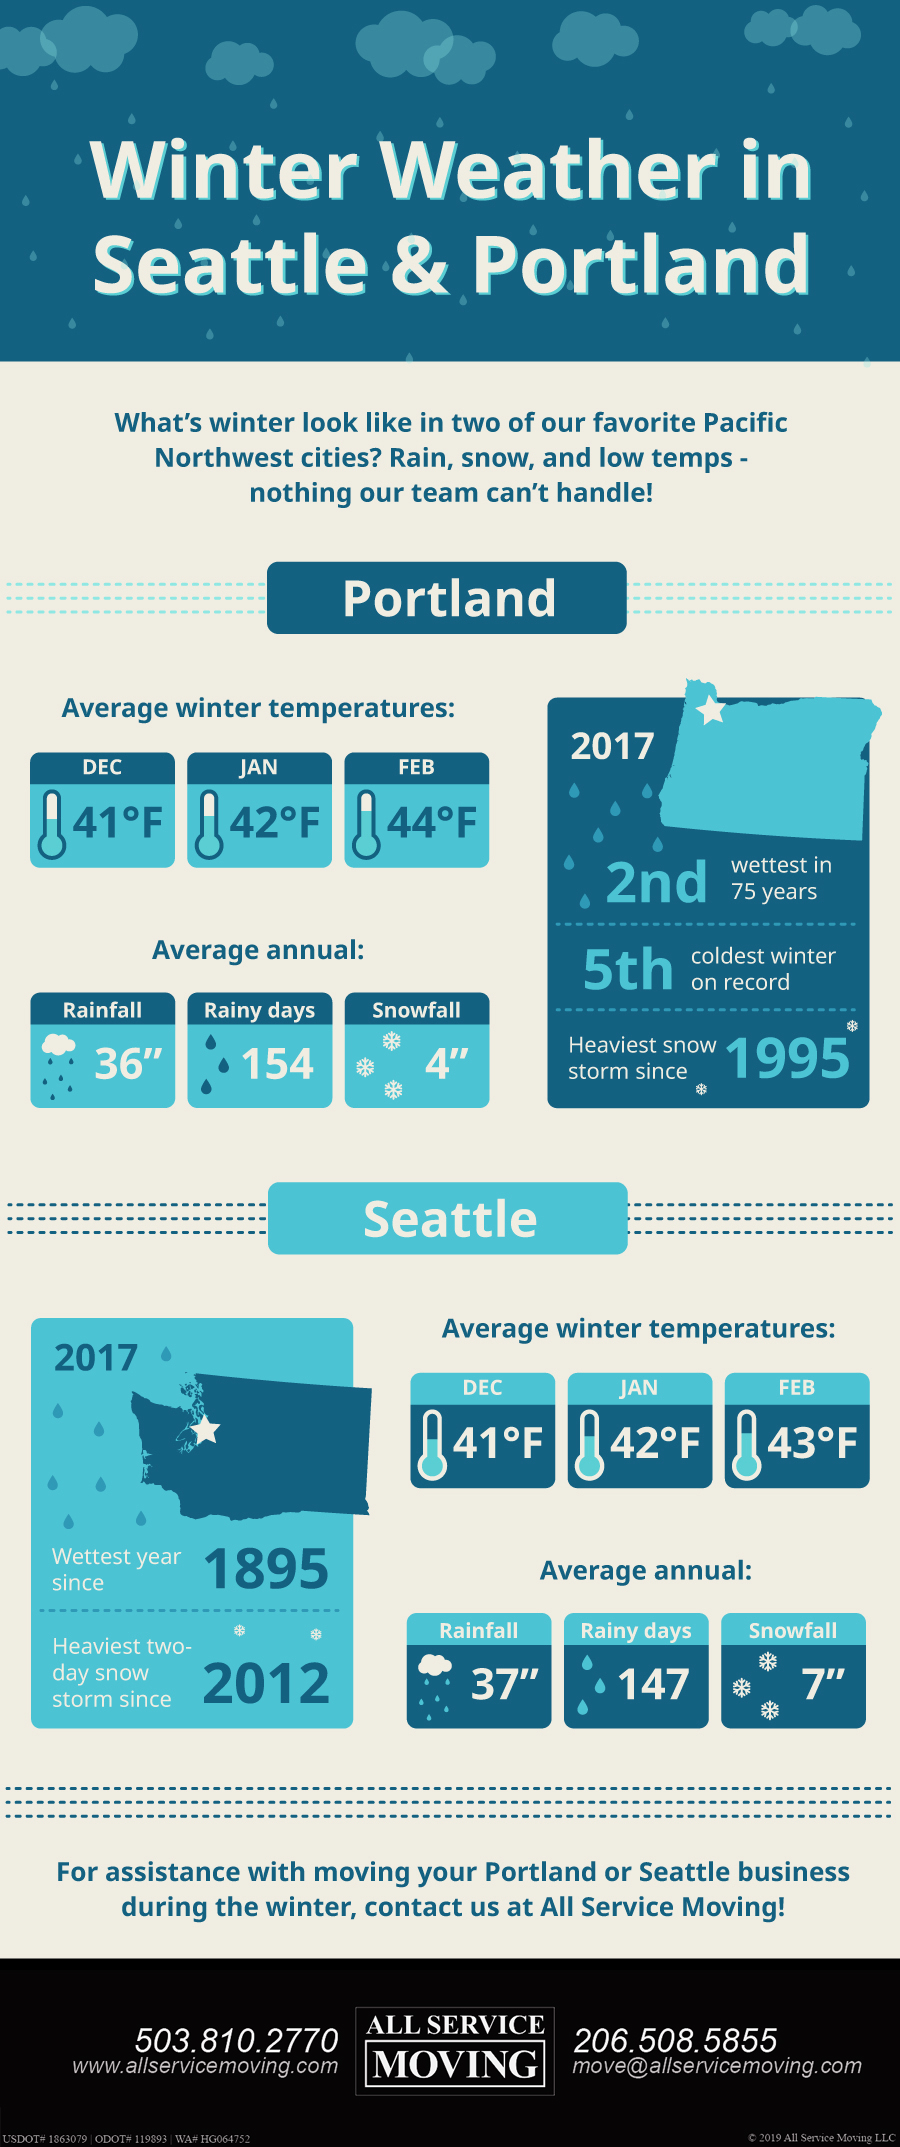 All-Service-Moving_Winter-Weather-in-Seattle-and-Portland-Infographic